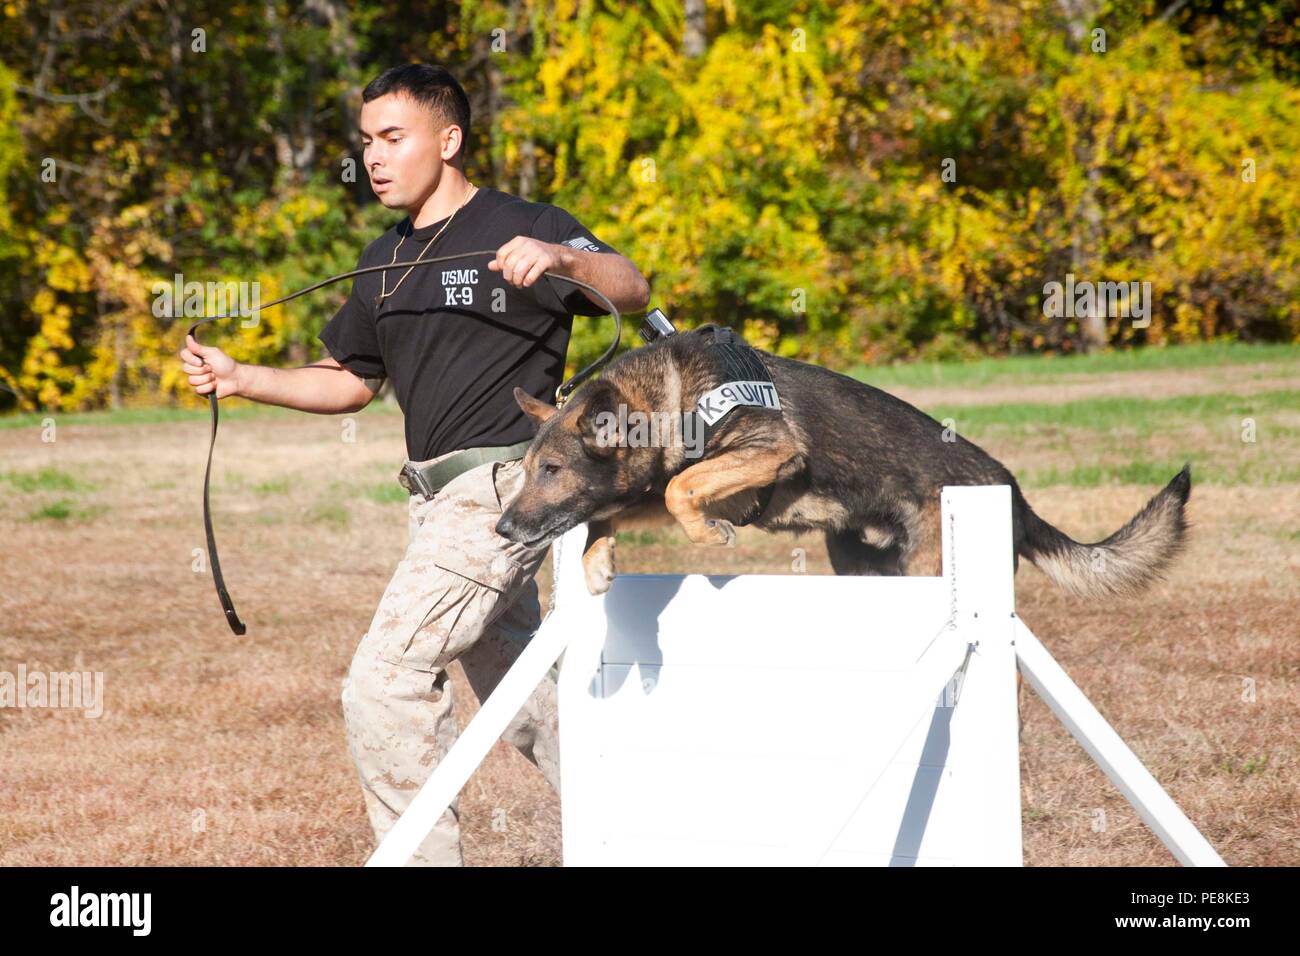 Sgt. Shawn Eden, Quantico Canine Unit, and his working dog Segal participate in an iron dog competition Oct. 23 aboard Marine Corps Base Quantico. Military working dogs and their handlers often collaborate with outside agencies to improve detection training and bite-work training. Stock Photo